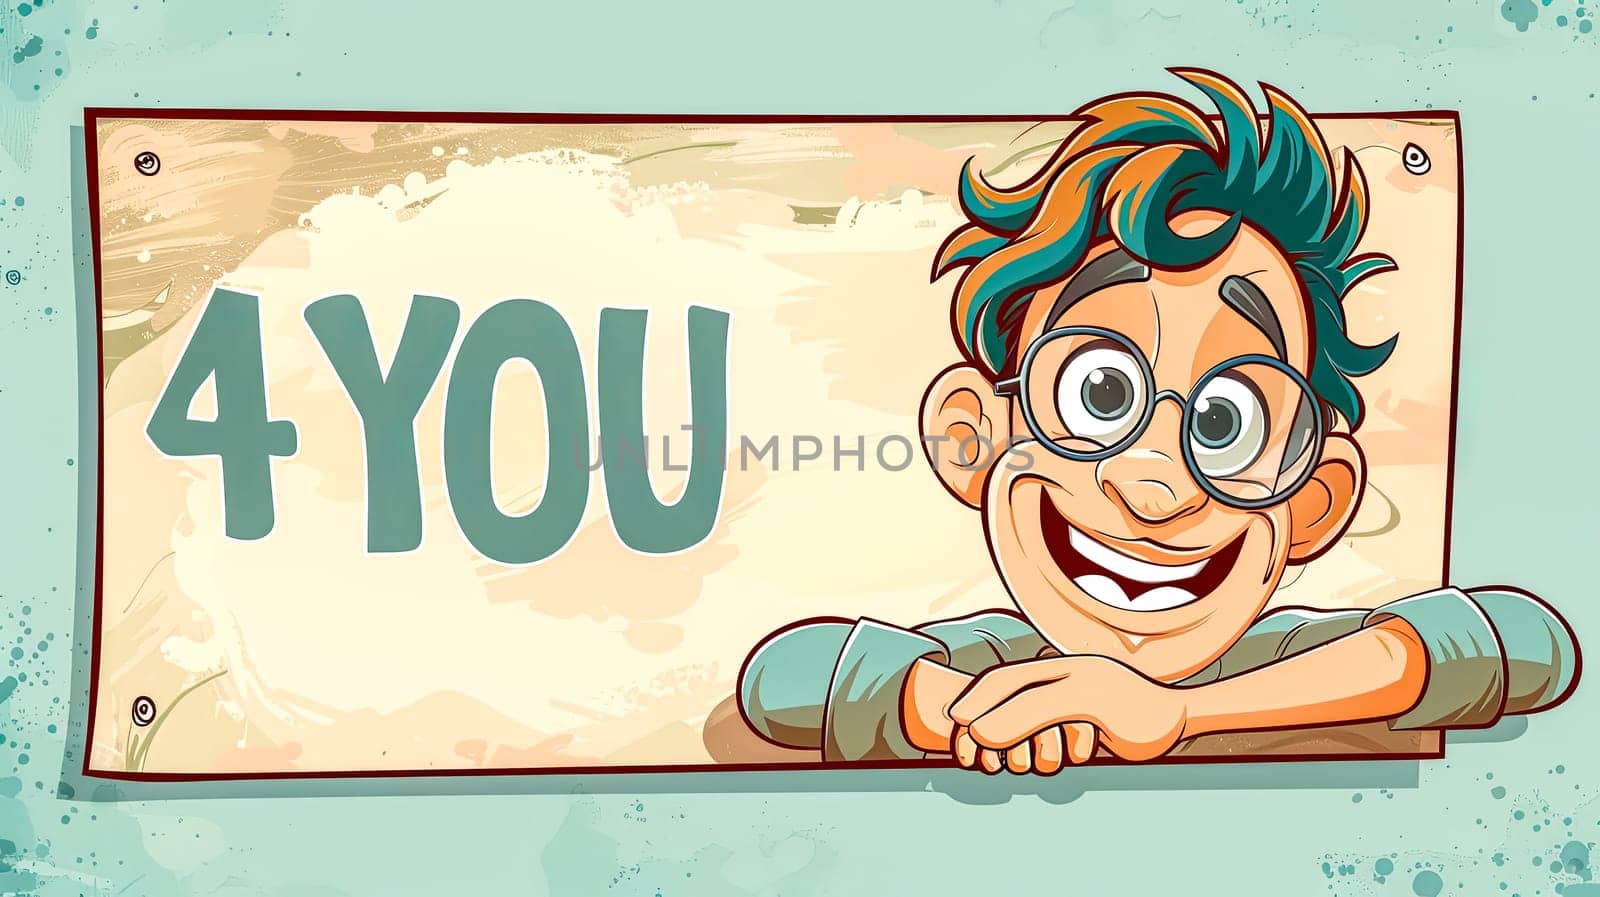 Colorful illustrated banner with a cheerful cartoon boy mascot leaning over a 4you sign